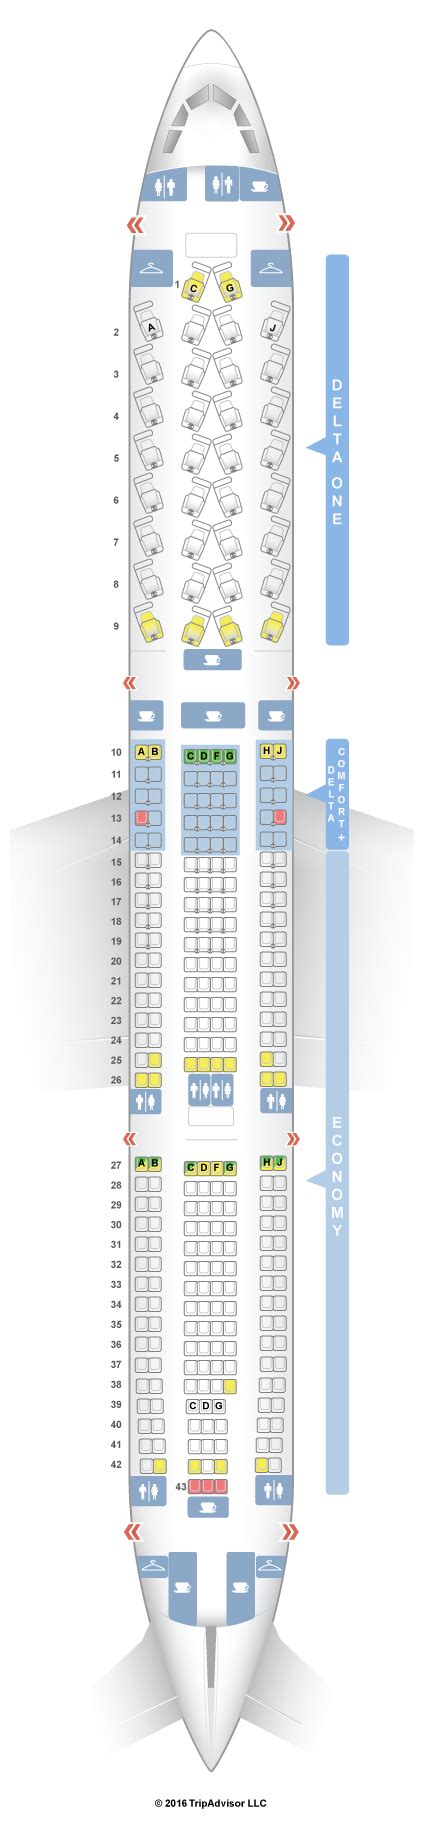 Seatguru delta a330 300. Outdated Seat Maps on SeatGuru Sep 06, 2023; Which cord do I need for Bose headphones in Boeing 777-300ER Sep 05, 2023; Turkish Airline tk176 Aug 30, 2023; Lufthansa business class Europe Aug 18, 2023; Southwest Boarding Aug 16, 2023; Lufthansa Airbus A330-300 version 3 bulkhead seats TV screen Aug 12, 2023; Delta's Unaccompanied Minor Embargo ... 